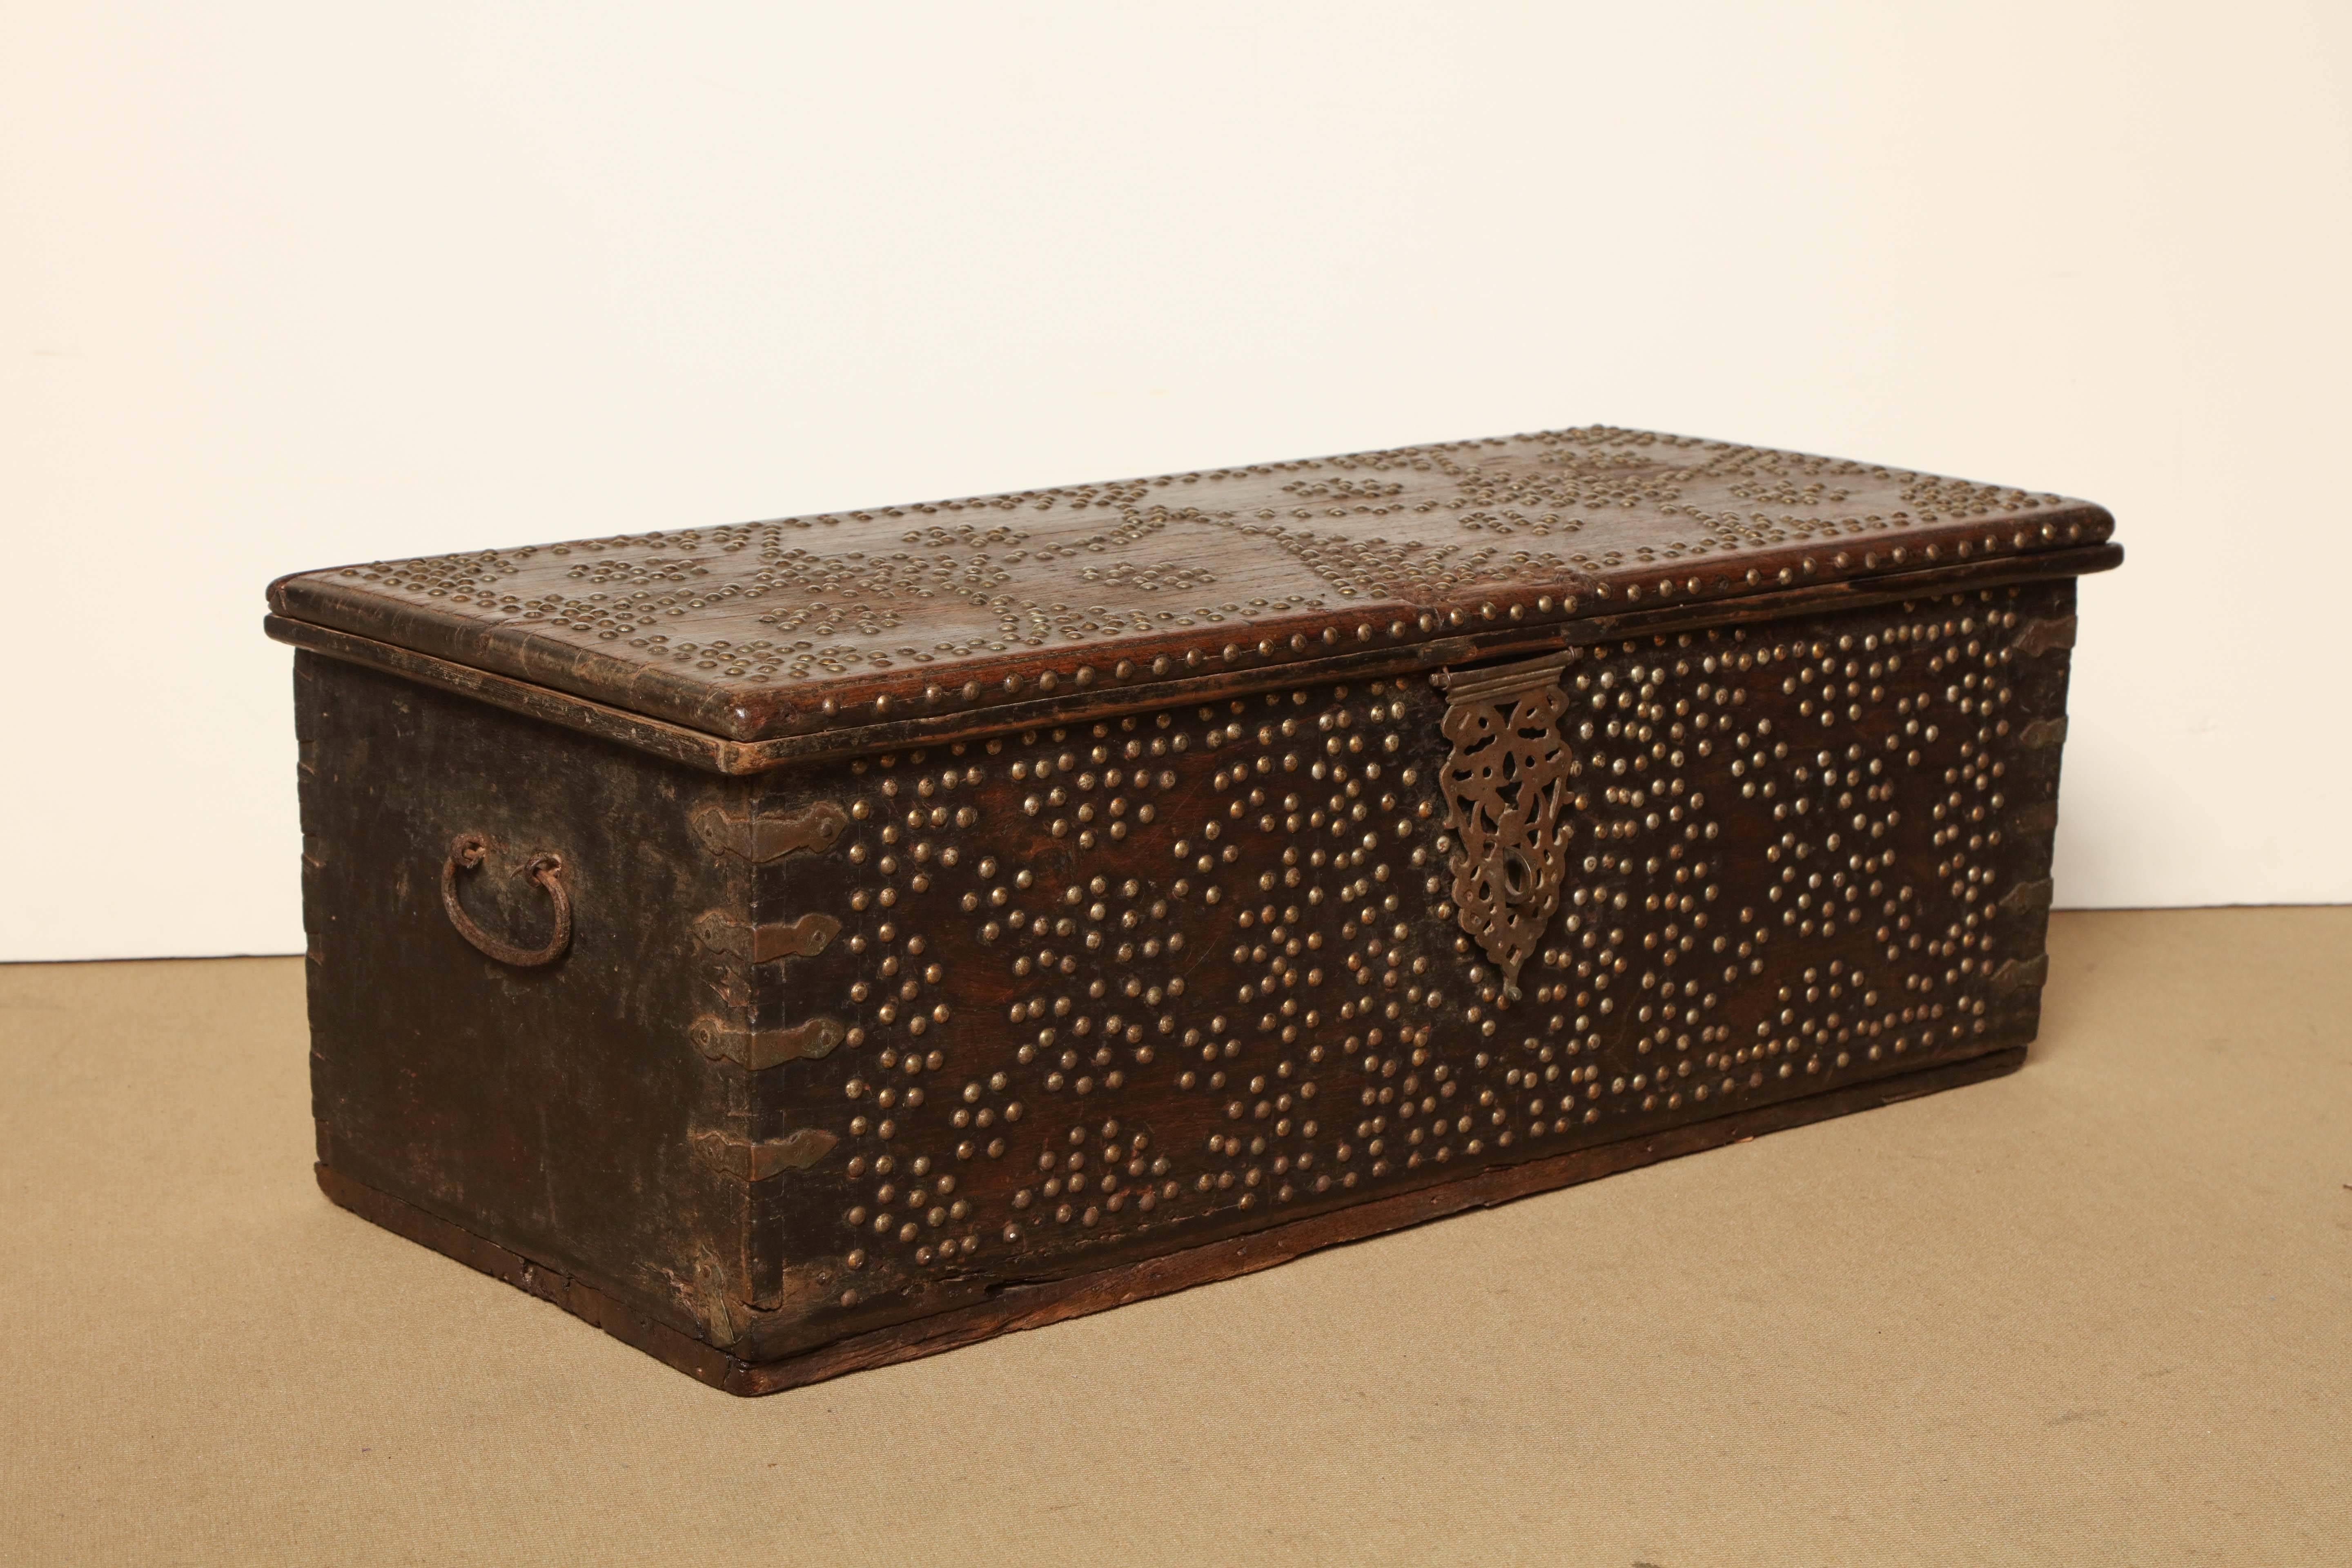 19th century Anglo-Indian, hardwood chest with studs.